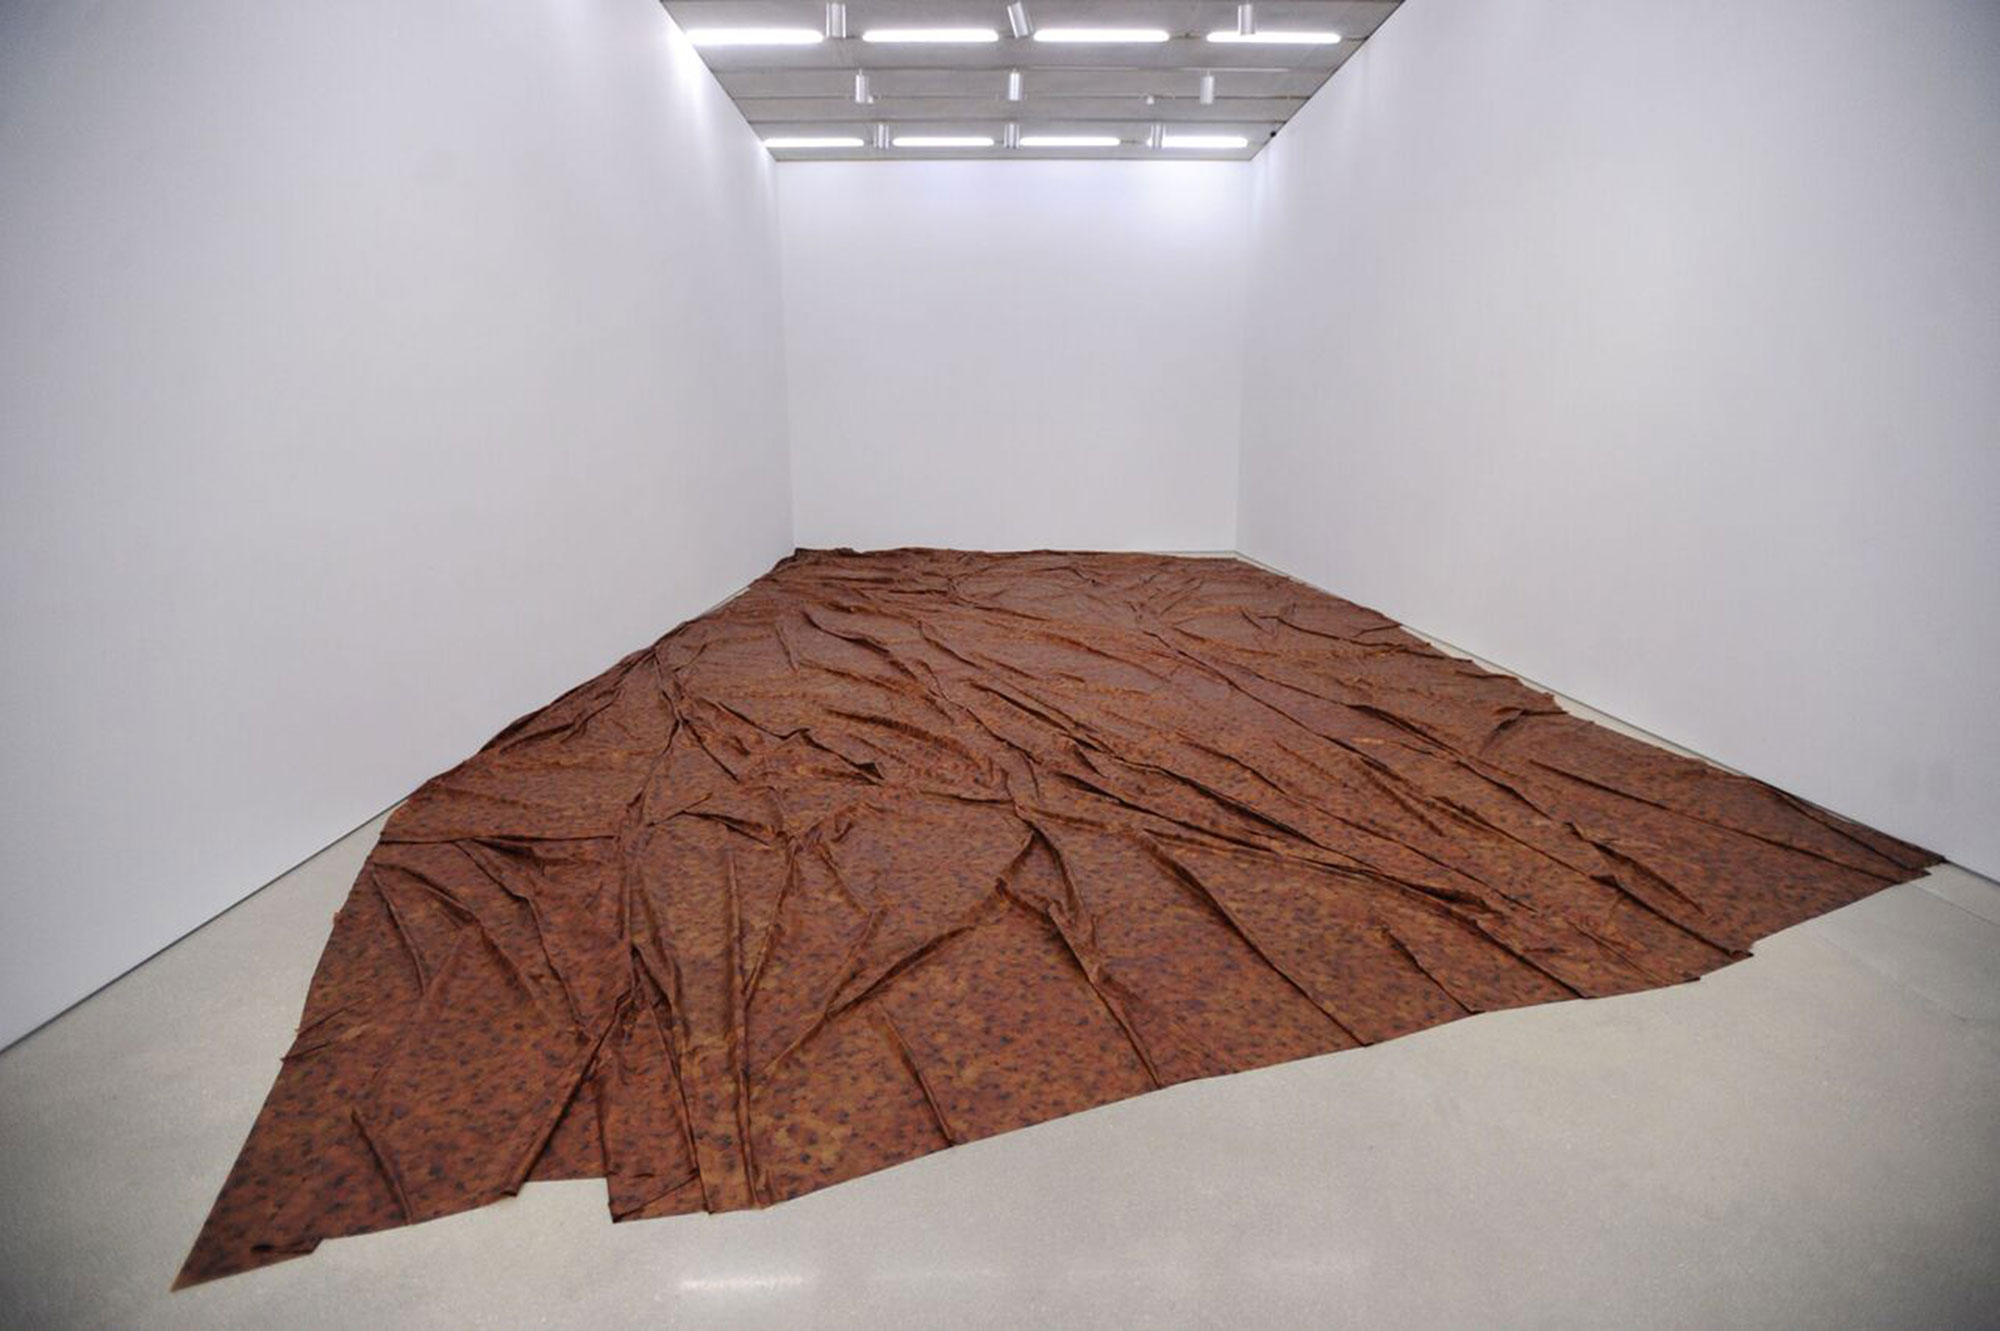 Doris Salcedo The Materiality of Mourning 